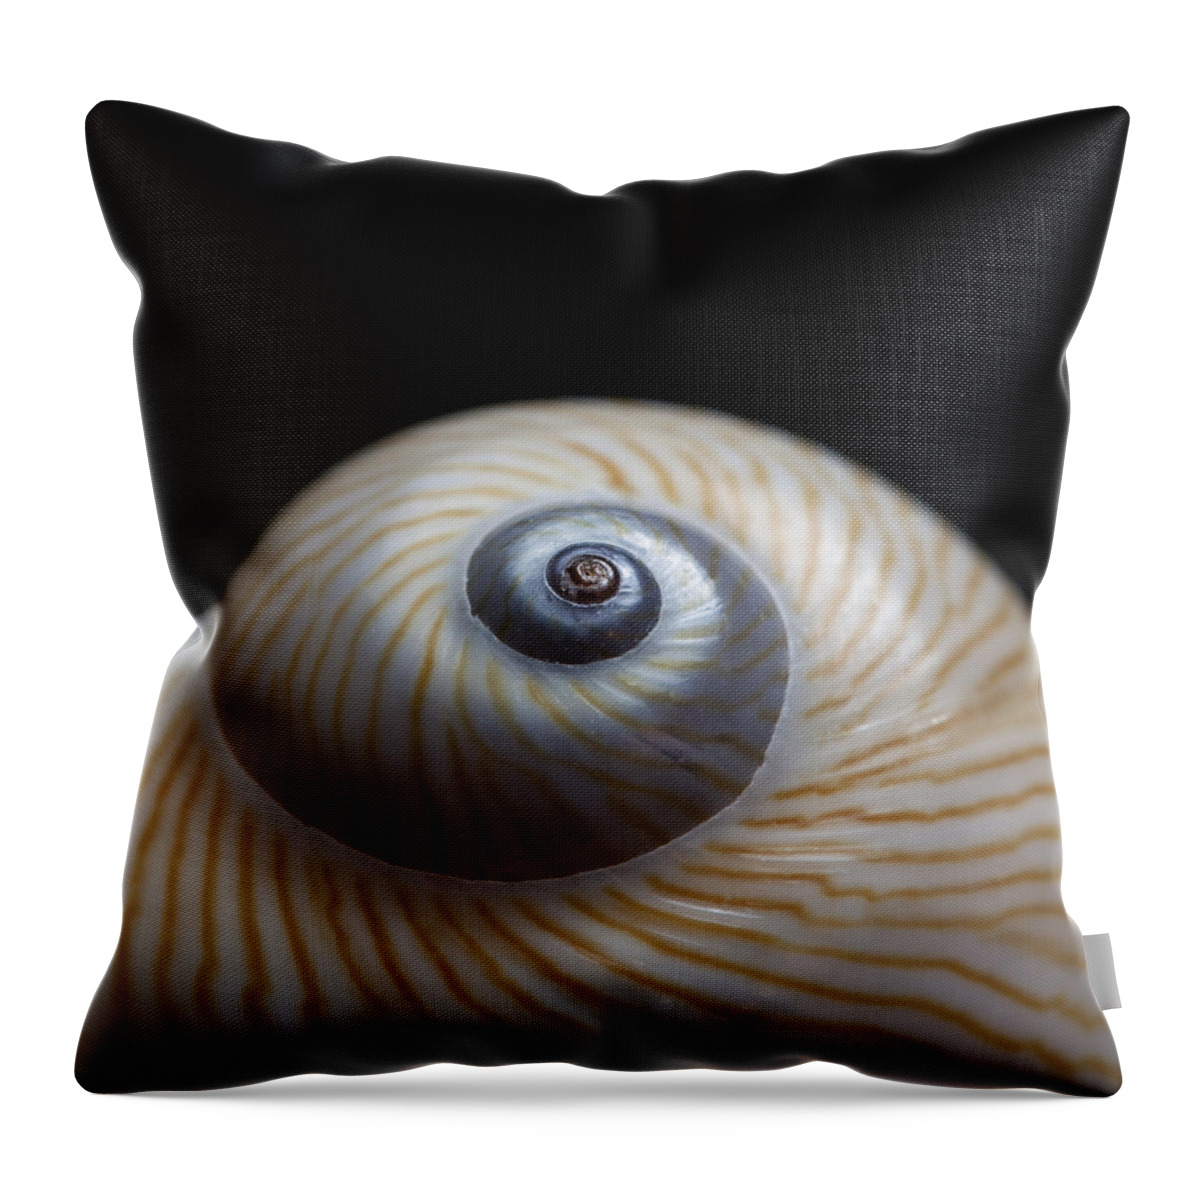 Moon Throw Pillow featuring the photograph Moon Shell by Carol Leigh